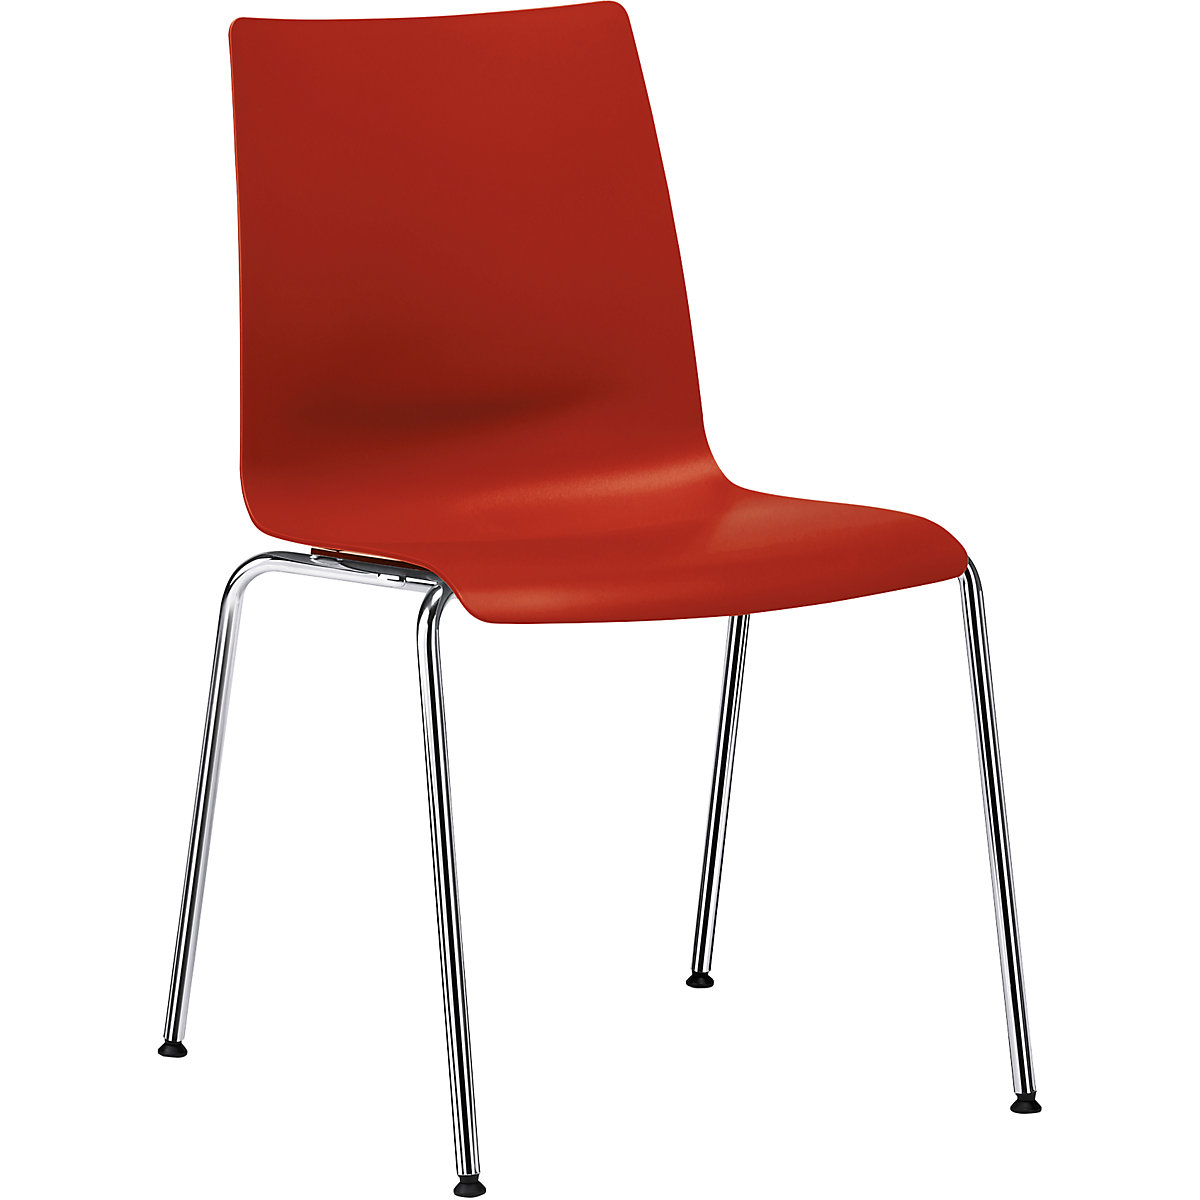 interstuhl – SNIKE contoured plastic chair, one piece seat made of PP, red